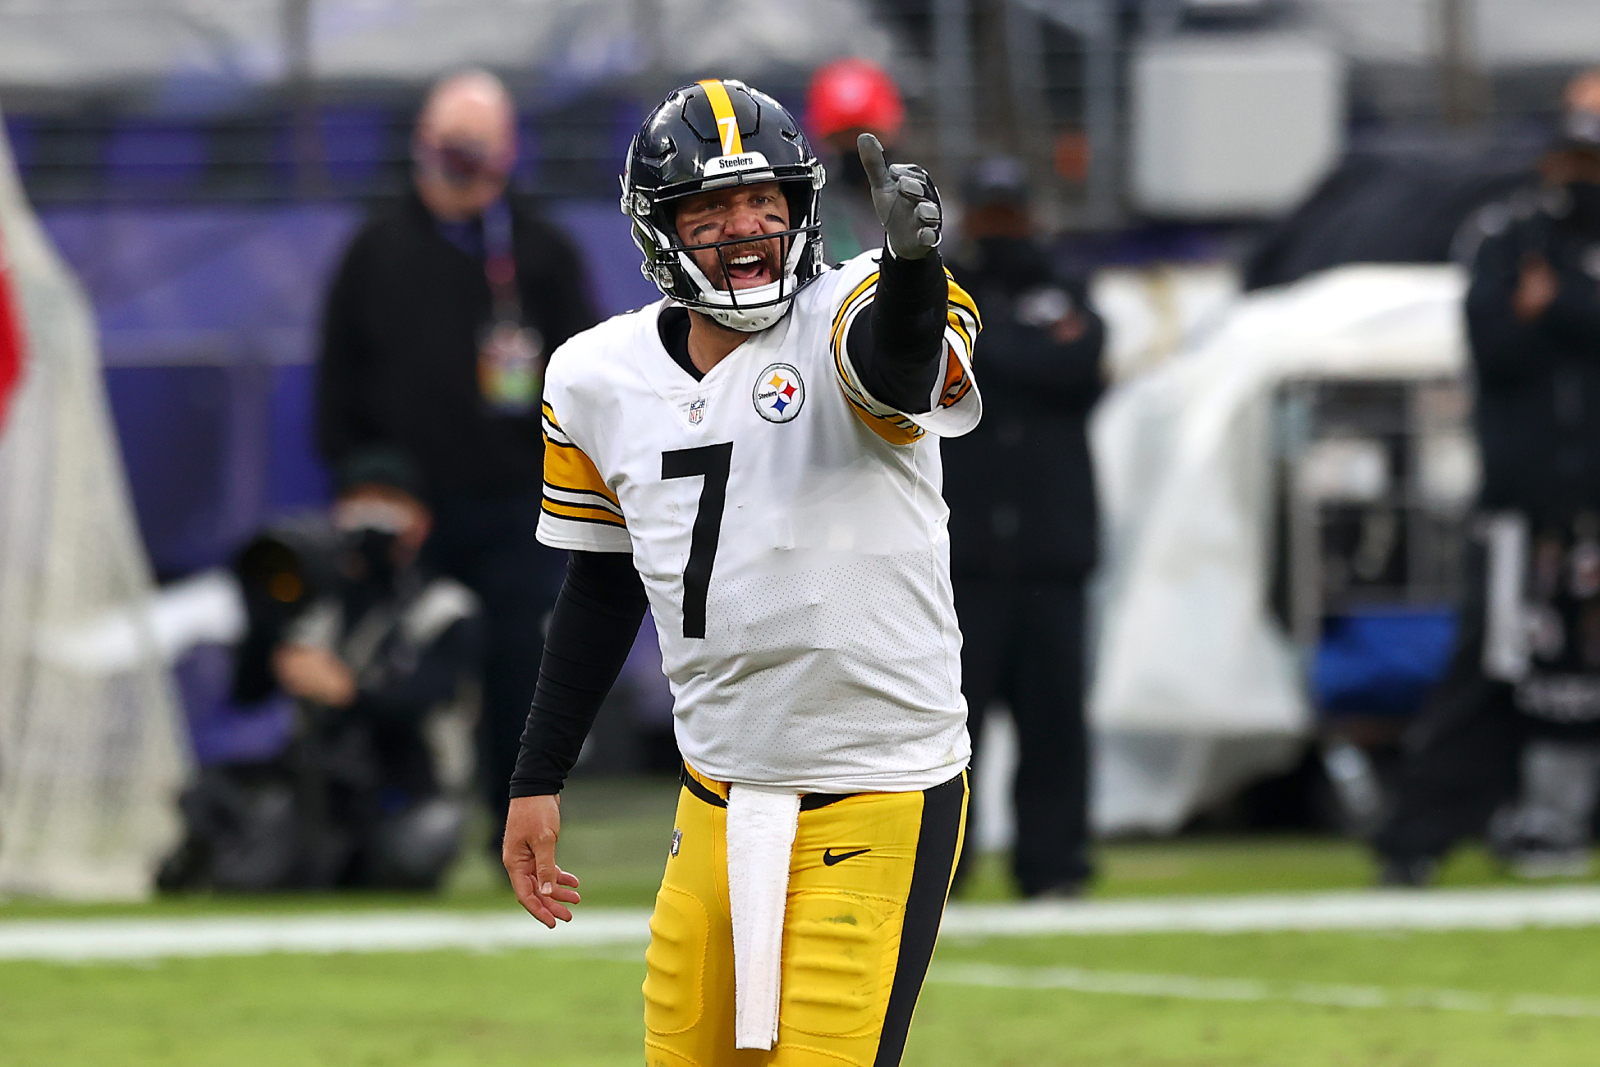 Ben Roethlisberger has already become an NFL legend in his career. His recent move with the Steelers, though, just proved why he is a GOAT.